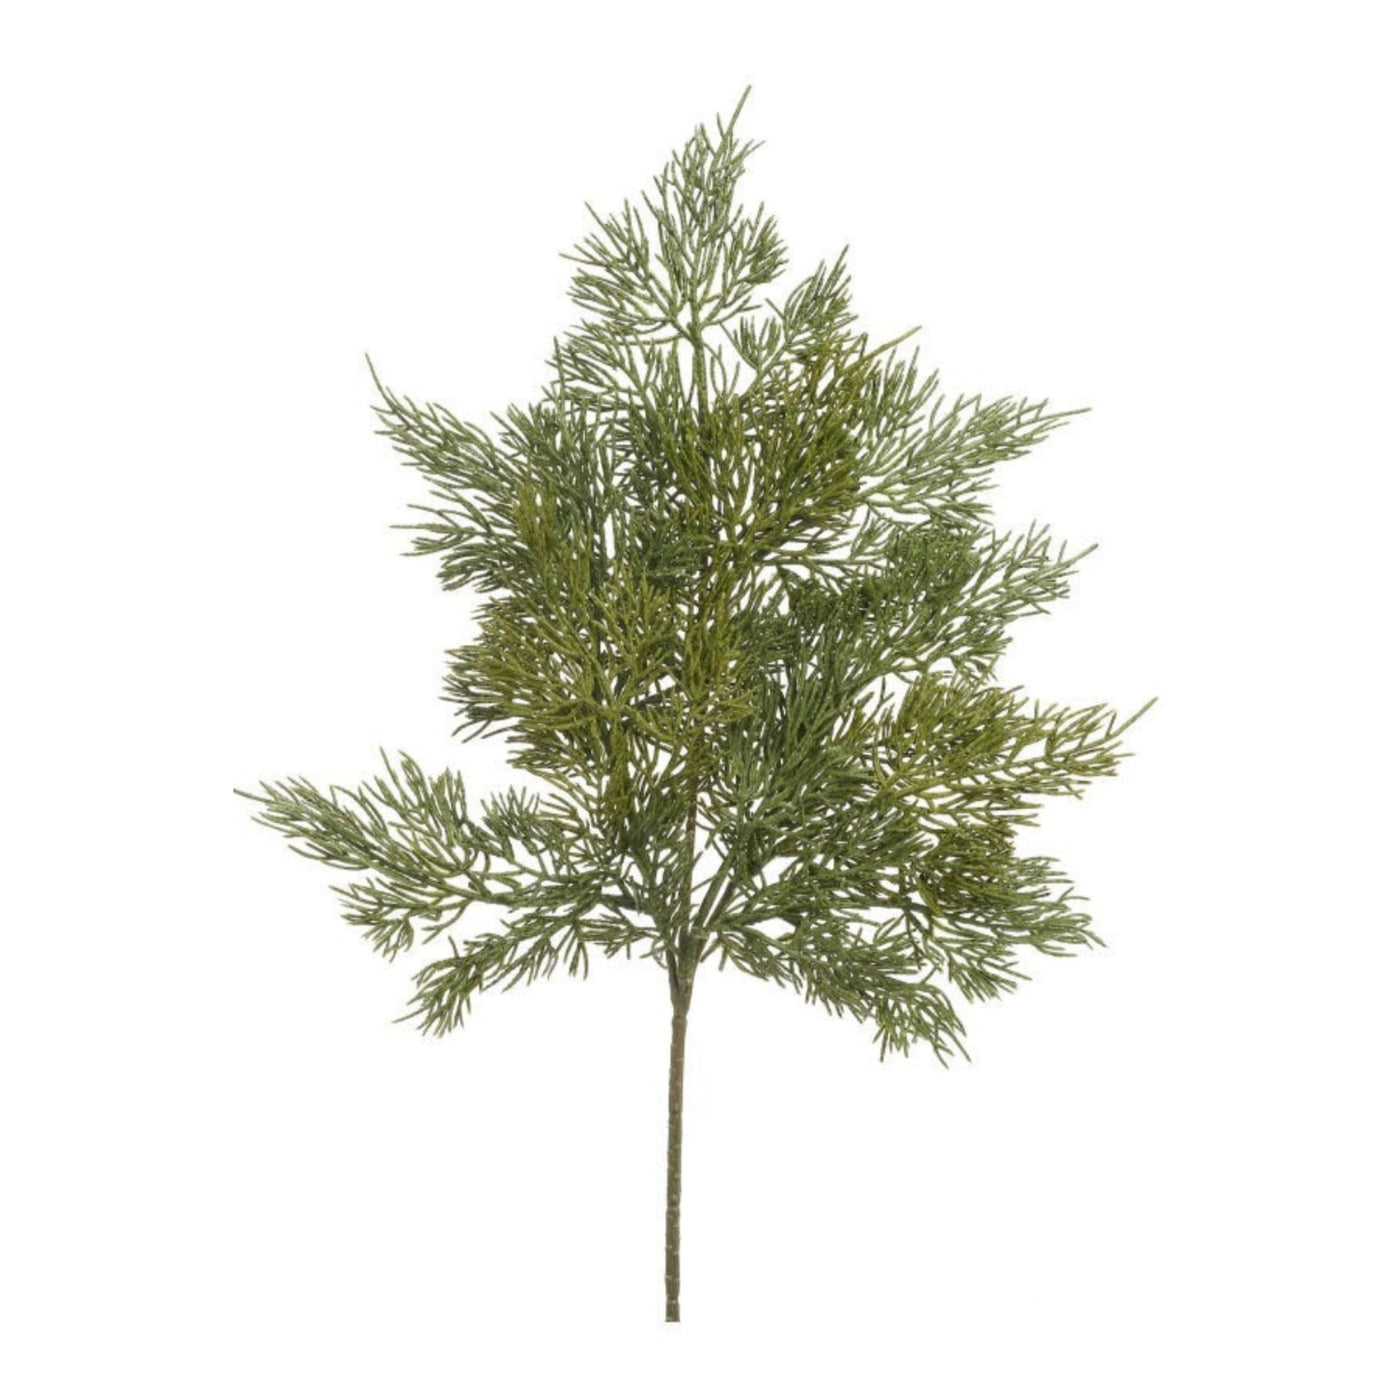 Faux Weeping Cedar Spray 17": Christmas Greenery at Avalon Willow Home. #1780484